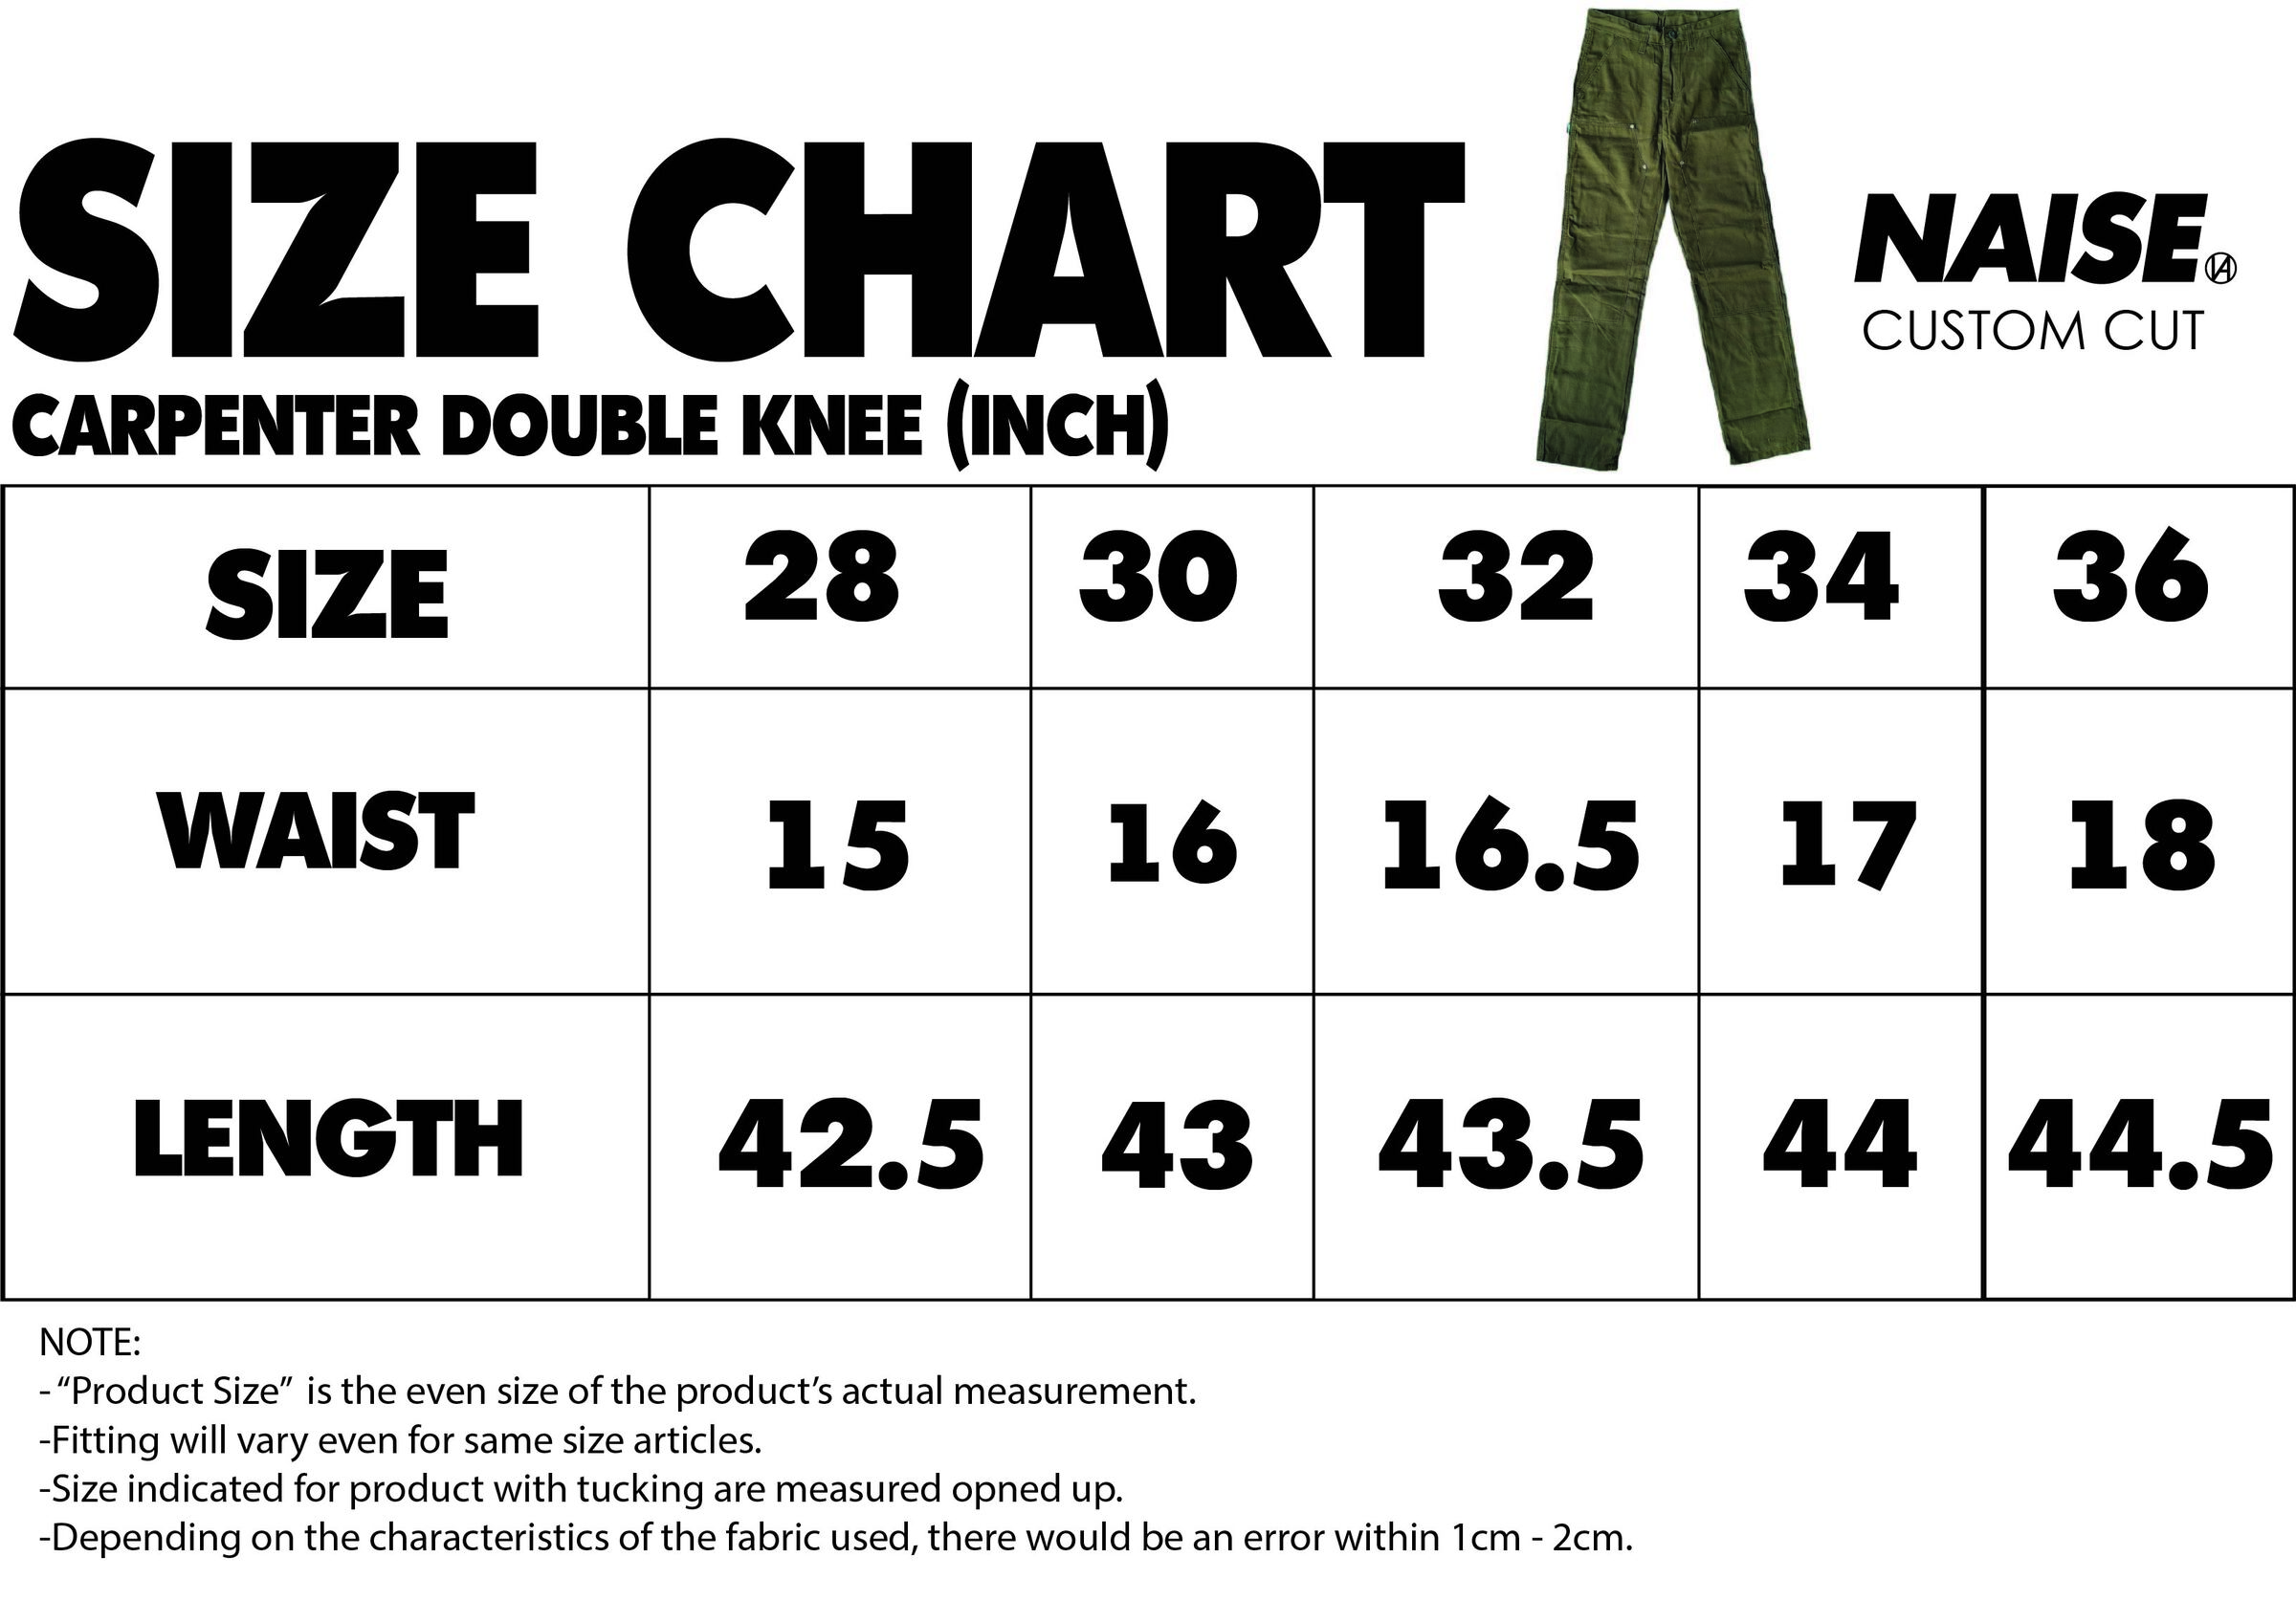 SIZE CHART CARPENTER DOUBLE KNEE BUMPER RAYA 2024 NOTE INCLUDED